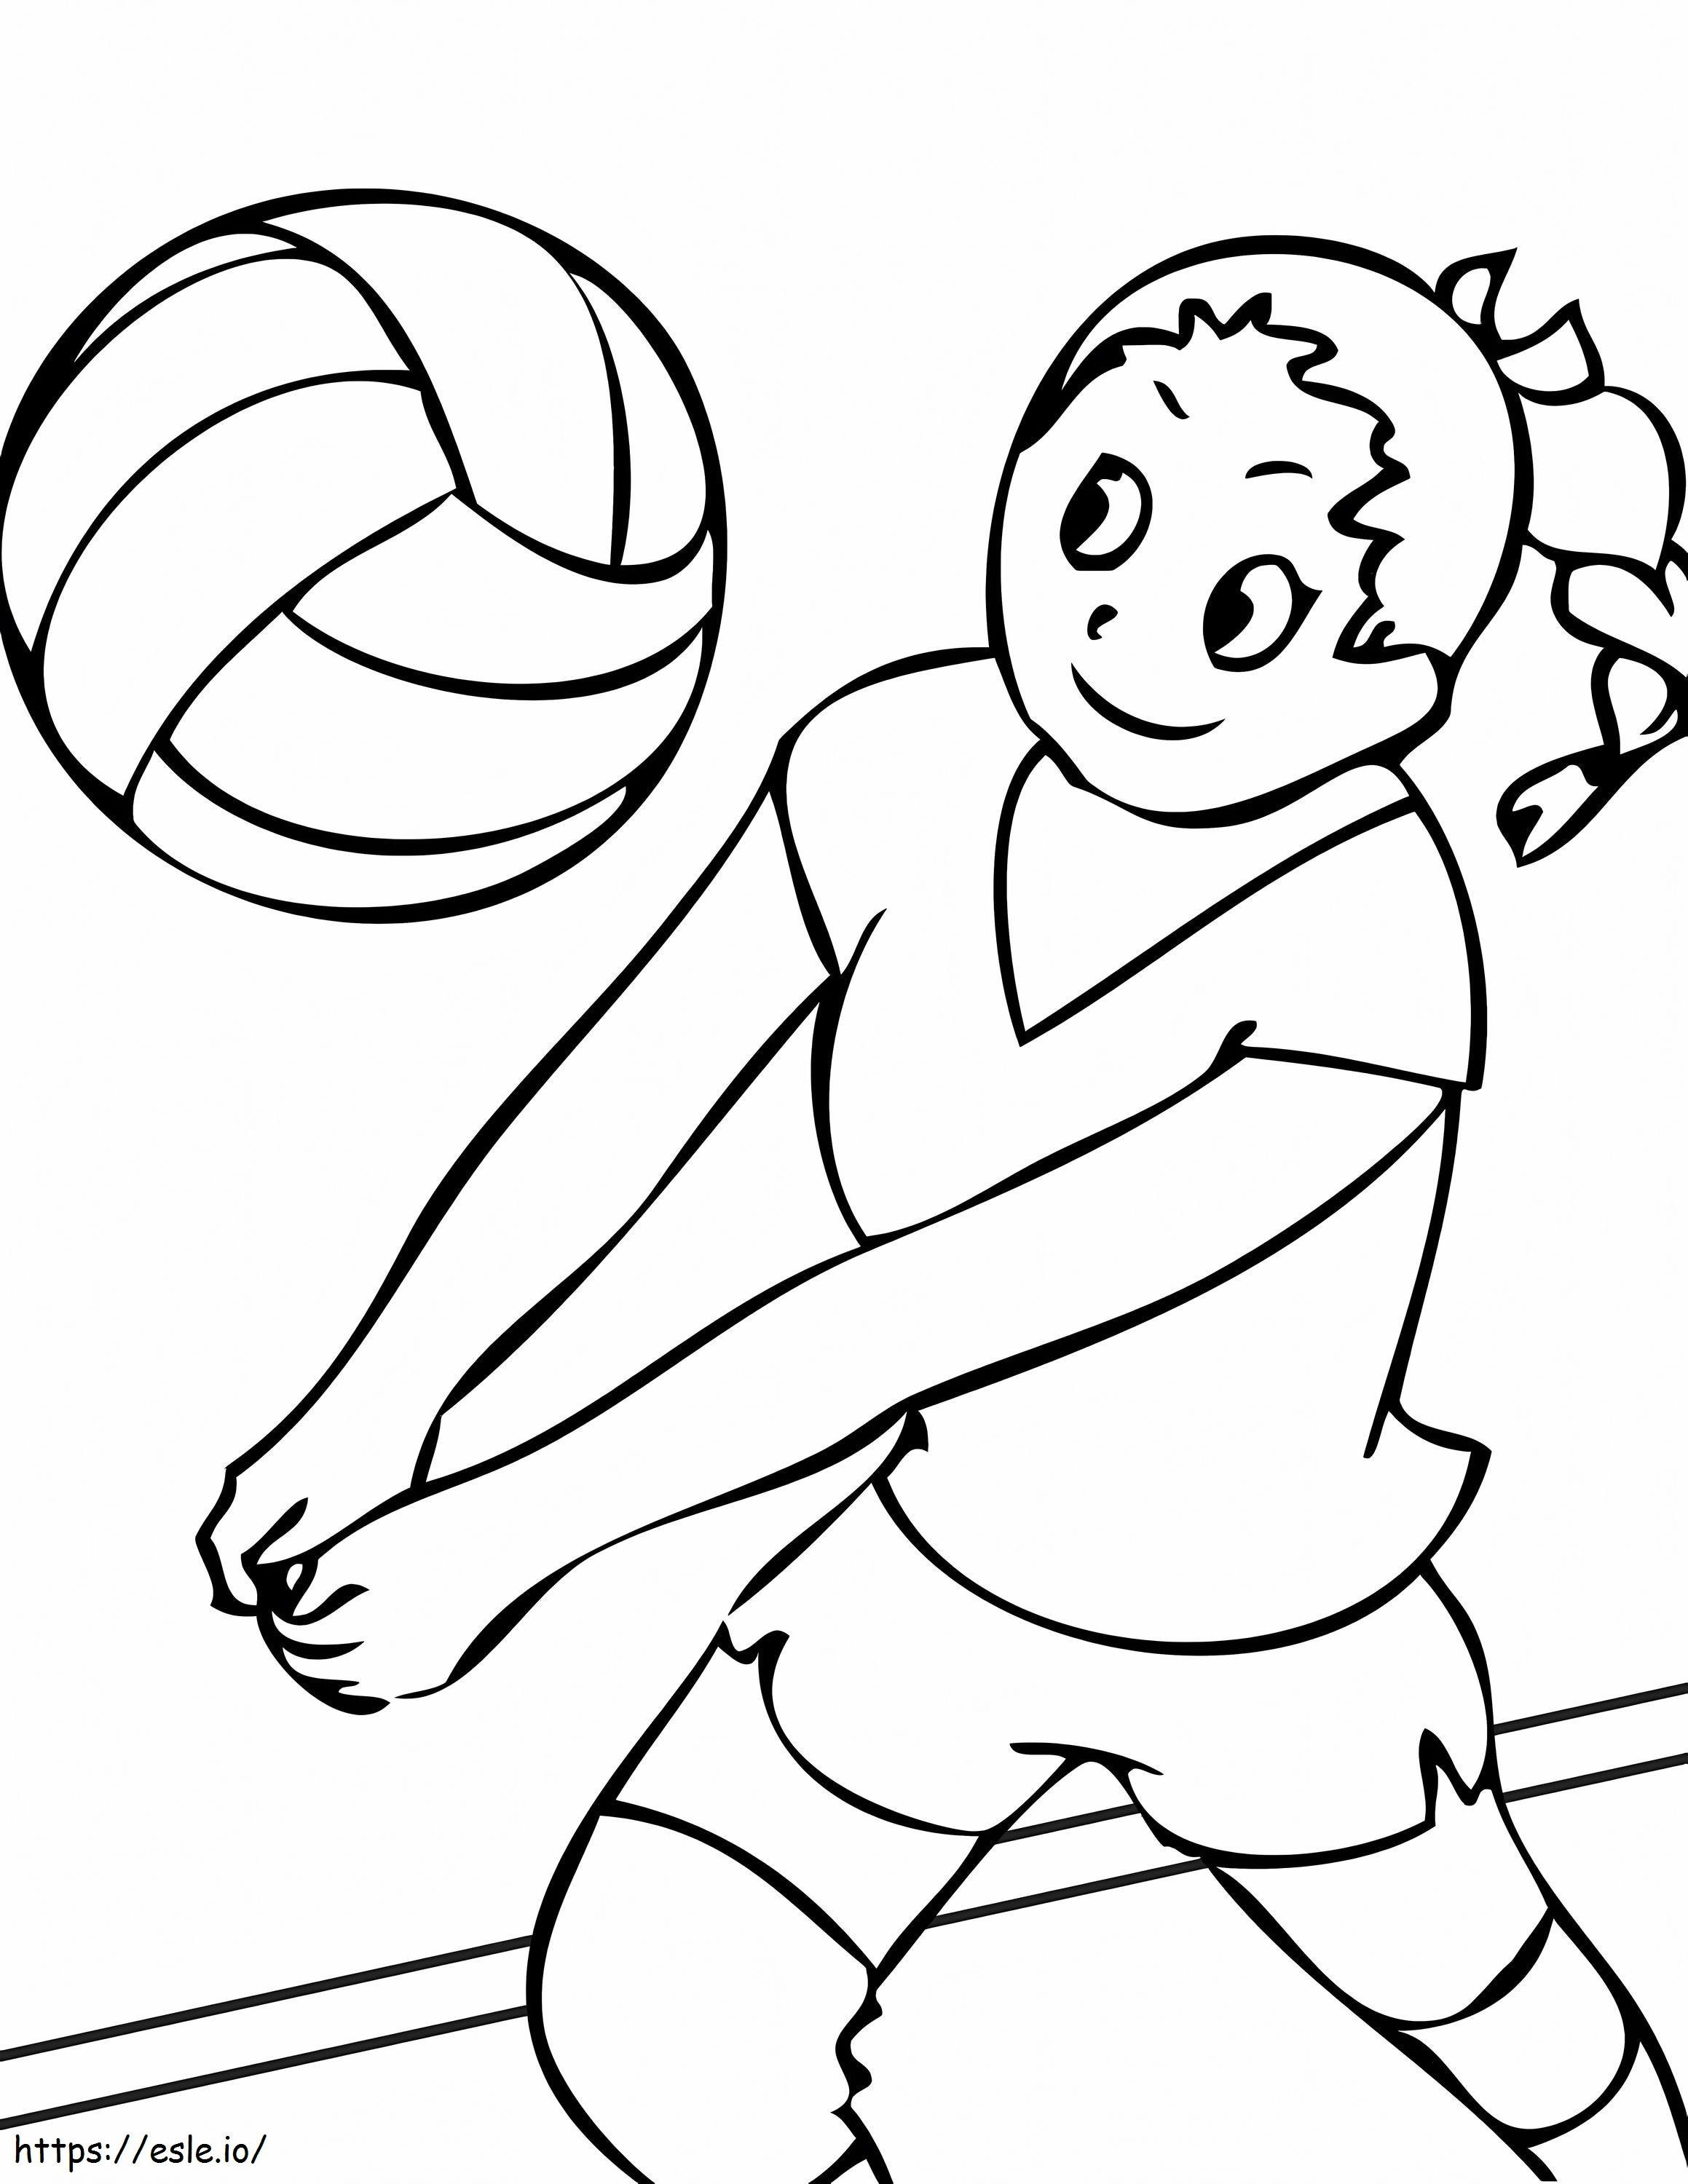 She Plays Volleyball coloring page